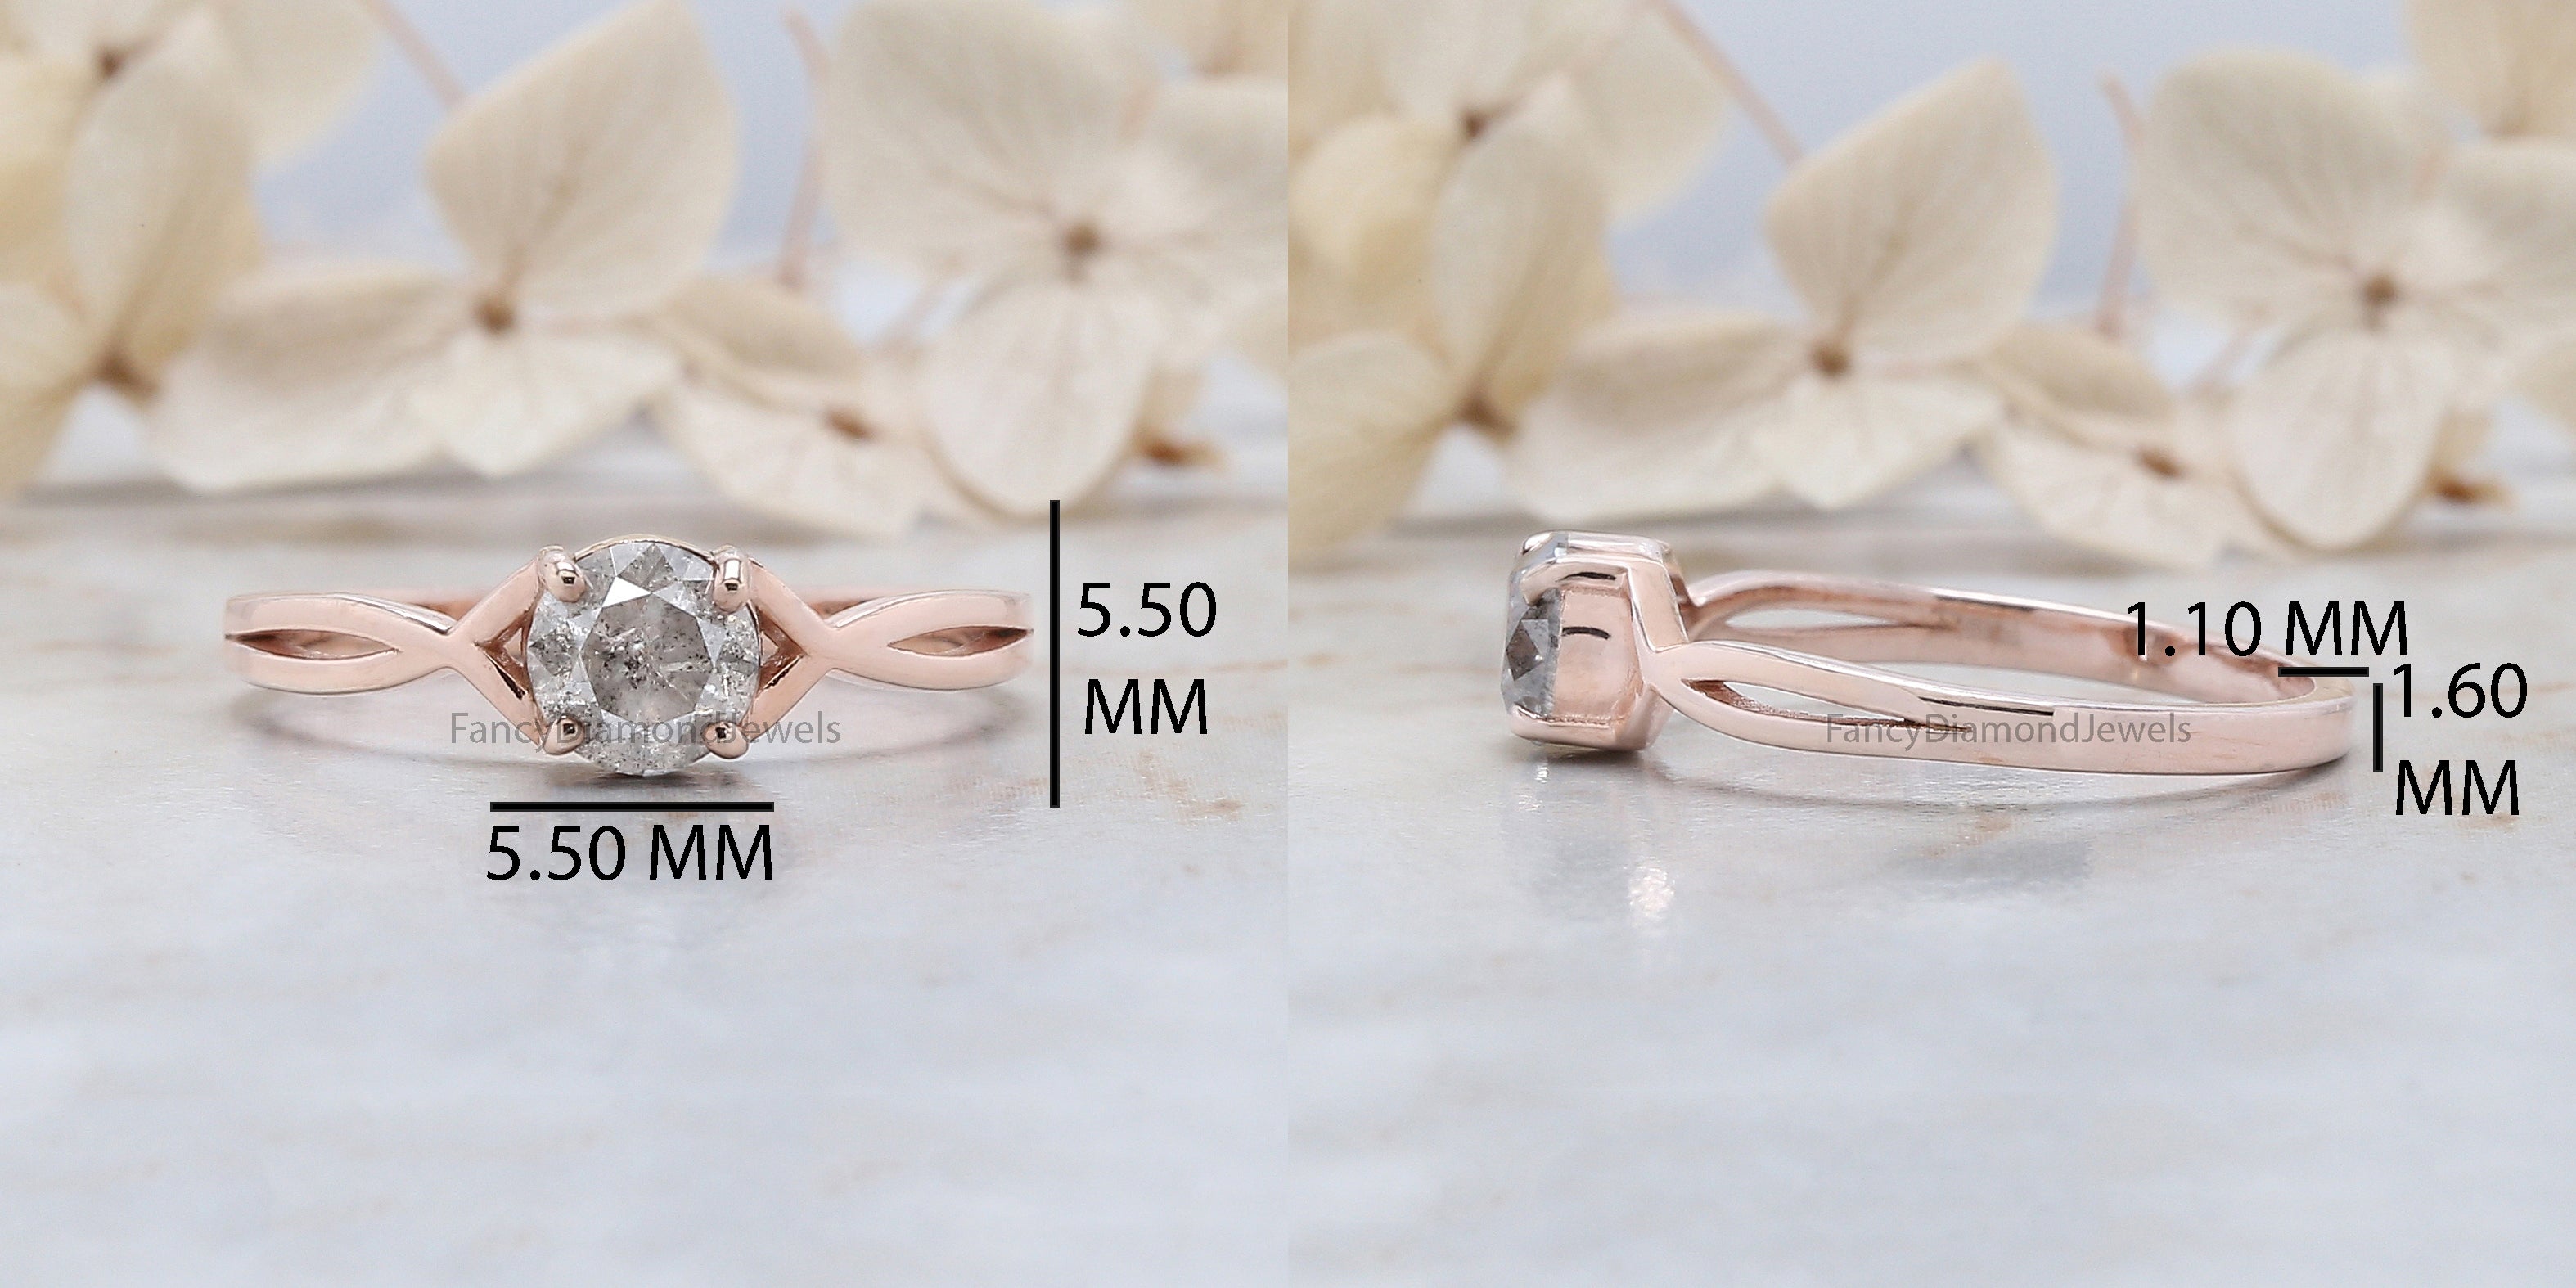 Round Cut Salt And Pepper Diamond Ring 0.66 Ct 5.30 MM Round Diamond Ring 14K Solid Rose Gold Silver Engagement Ring Gift For Her QN1078